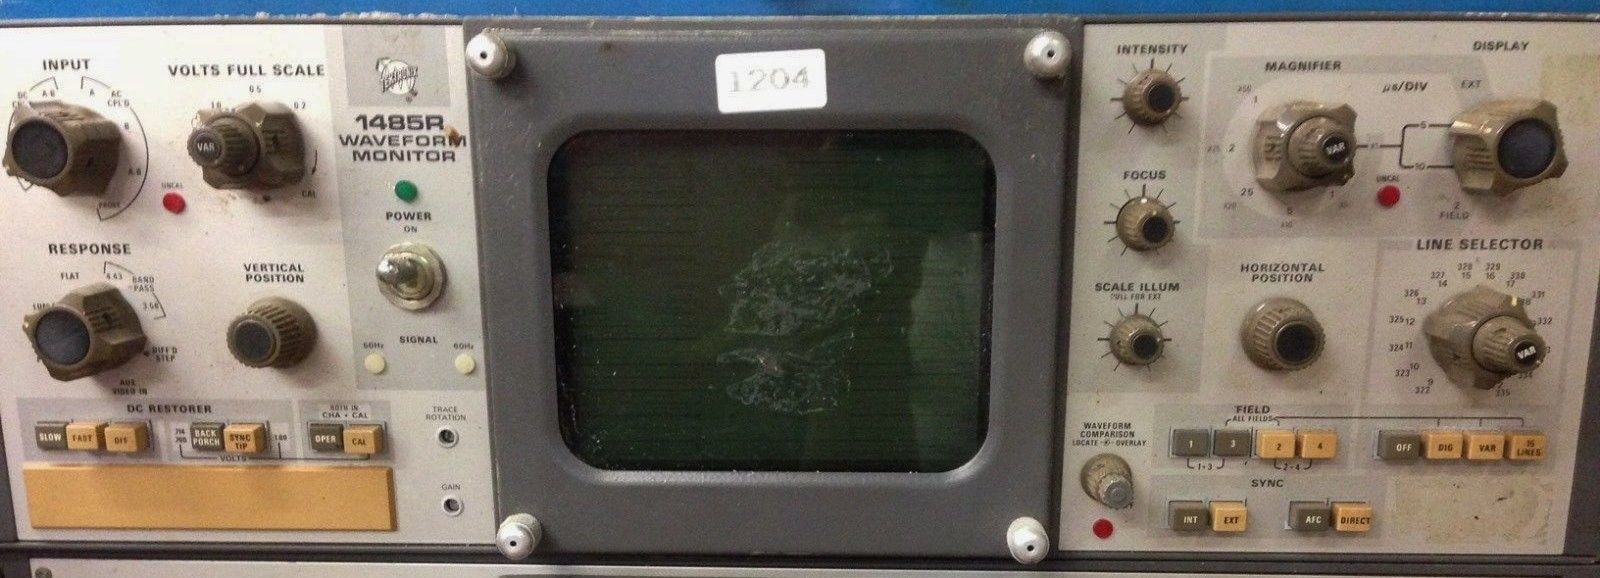 Tektronix 1485R Waveform Monitor Powers On Being sold for parts or repair